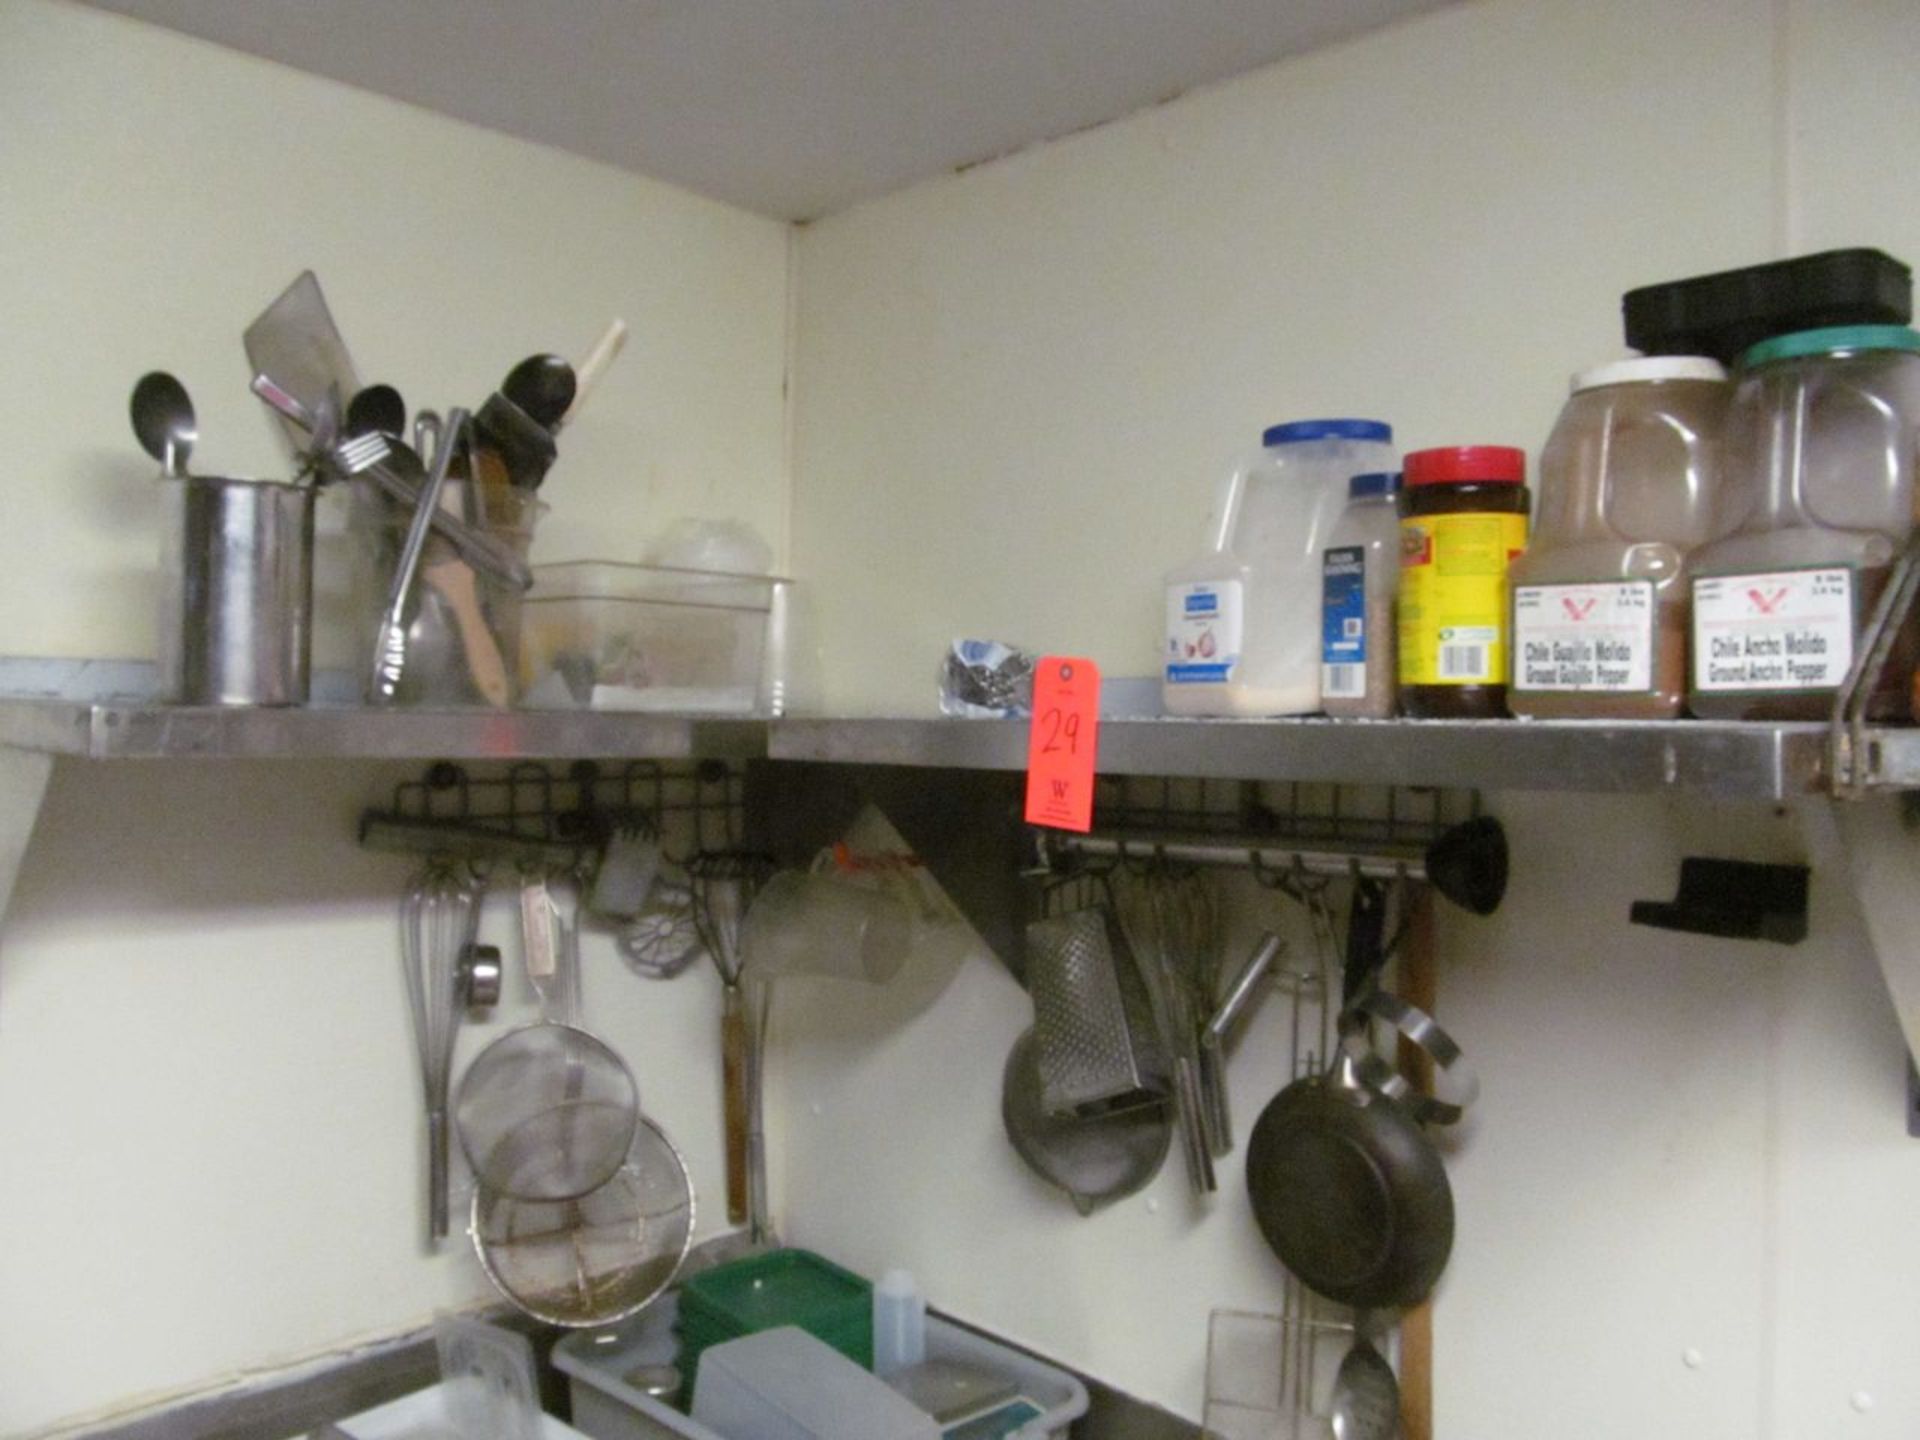 Lot - Misc. Items in Wash Area, to Include: Hanging Utensils, (4) Shelving Units, Utensils, - Image 5 of 7